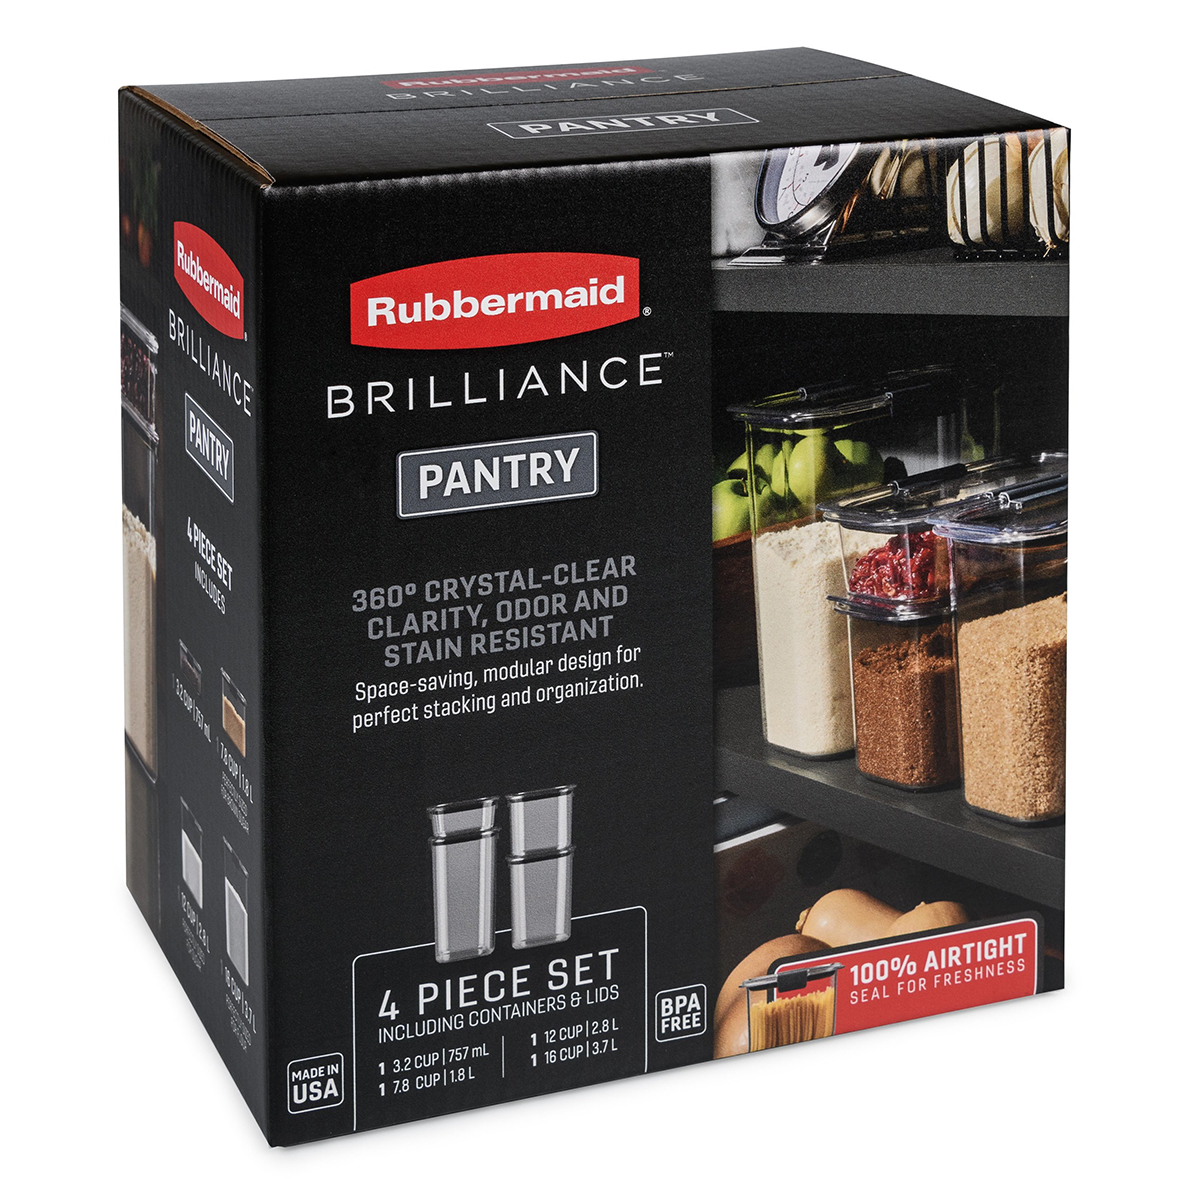 Rubbermaid Brilliance Pantry Organization & Food Storage Containers with  Airtight Lids, Set of 4 (8 Pieces Total) 